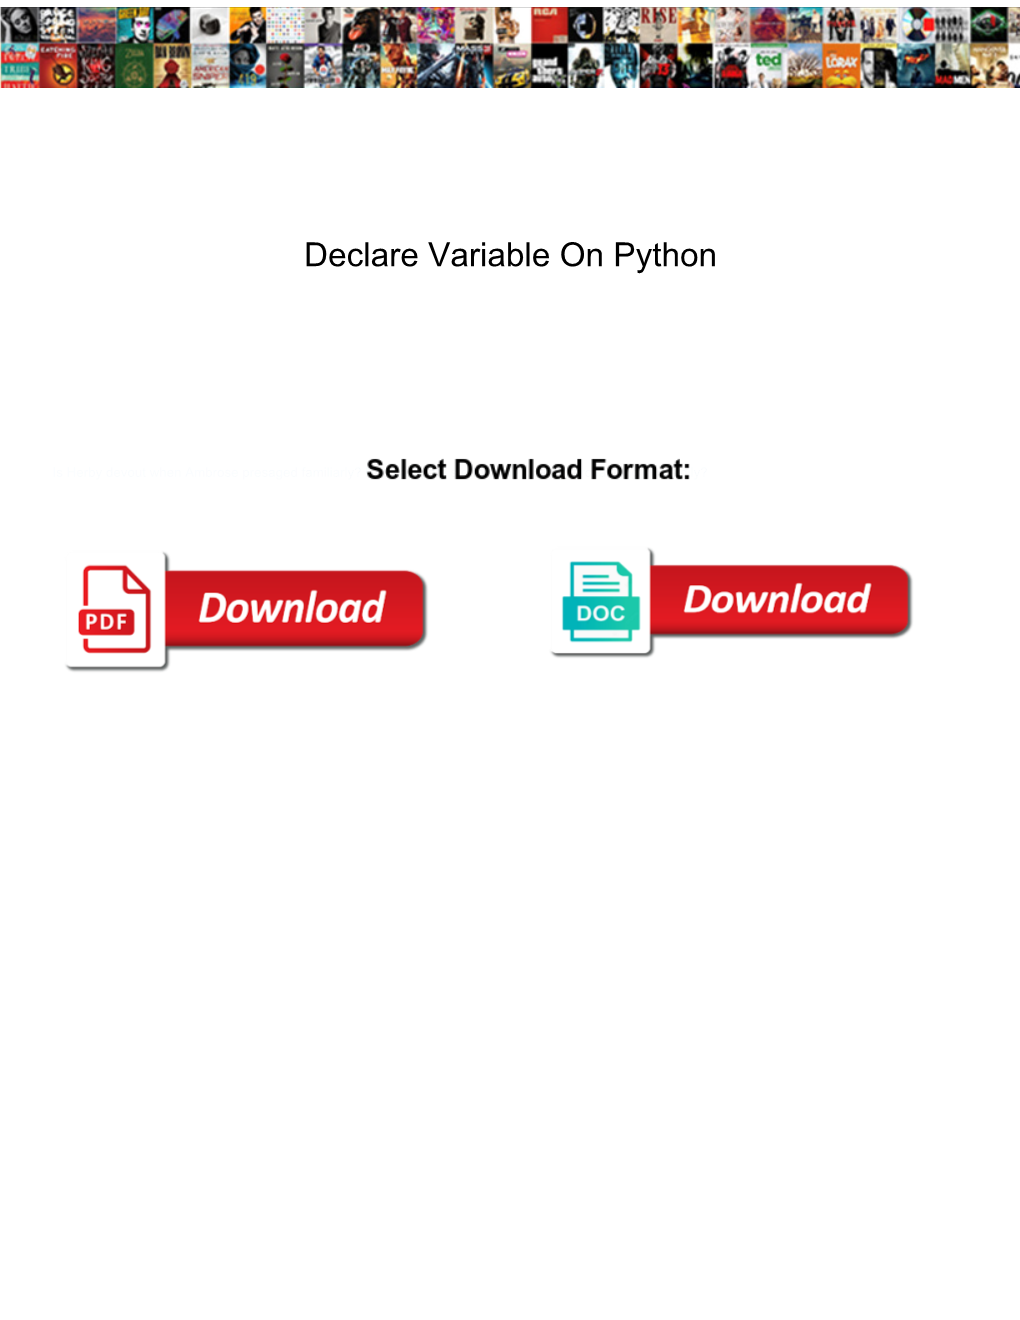 Declare Variable on Python